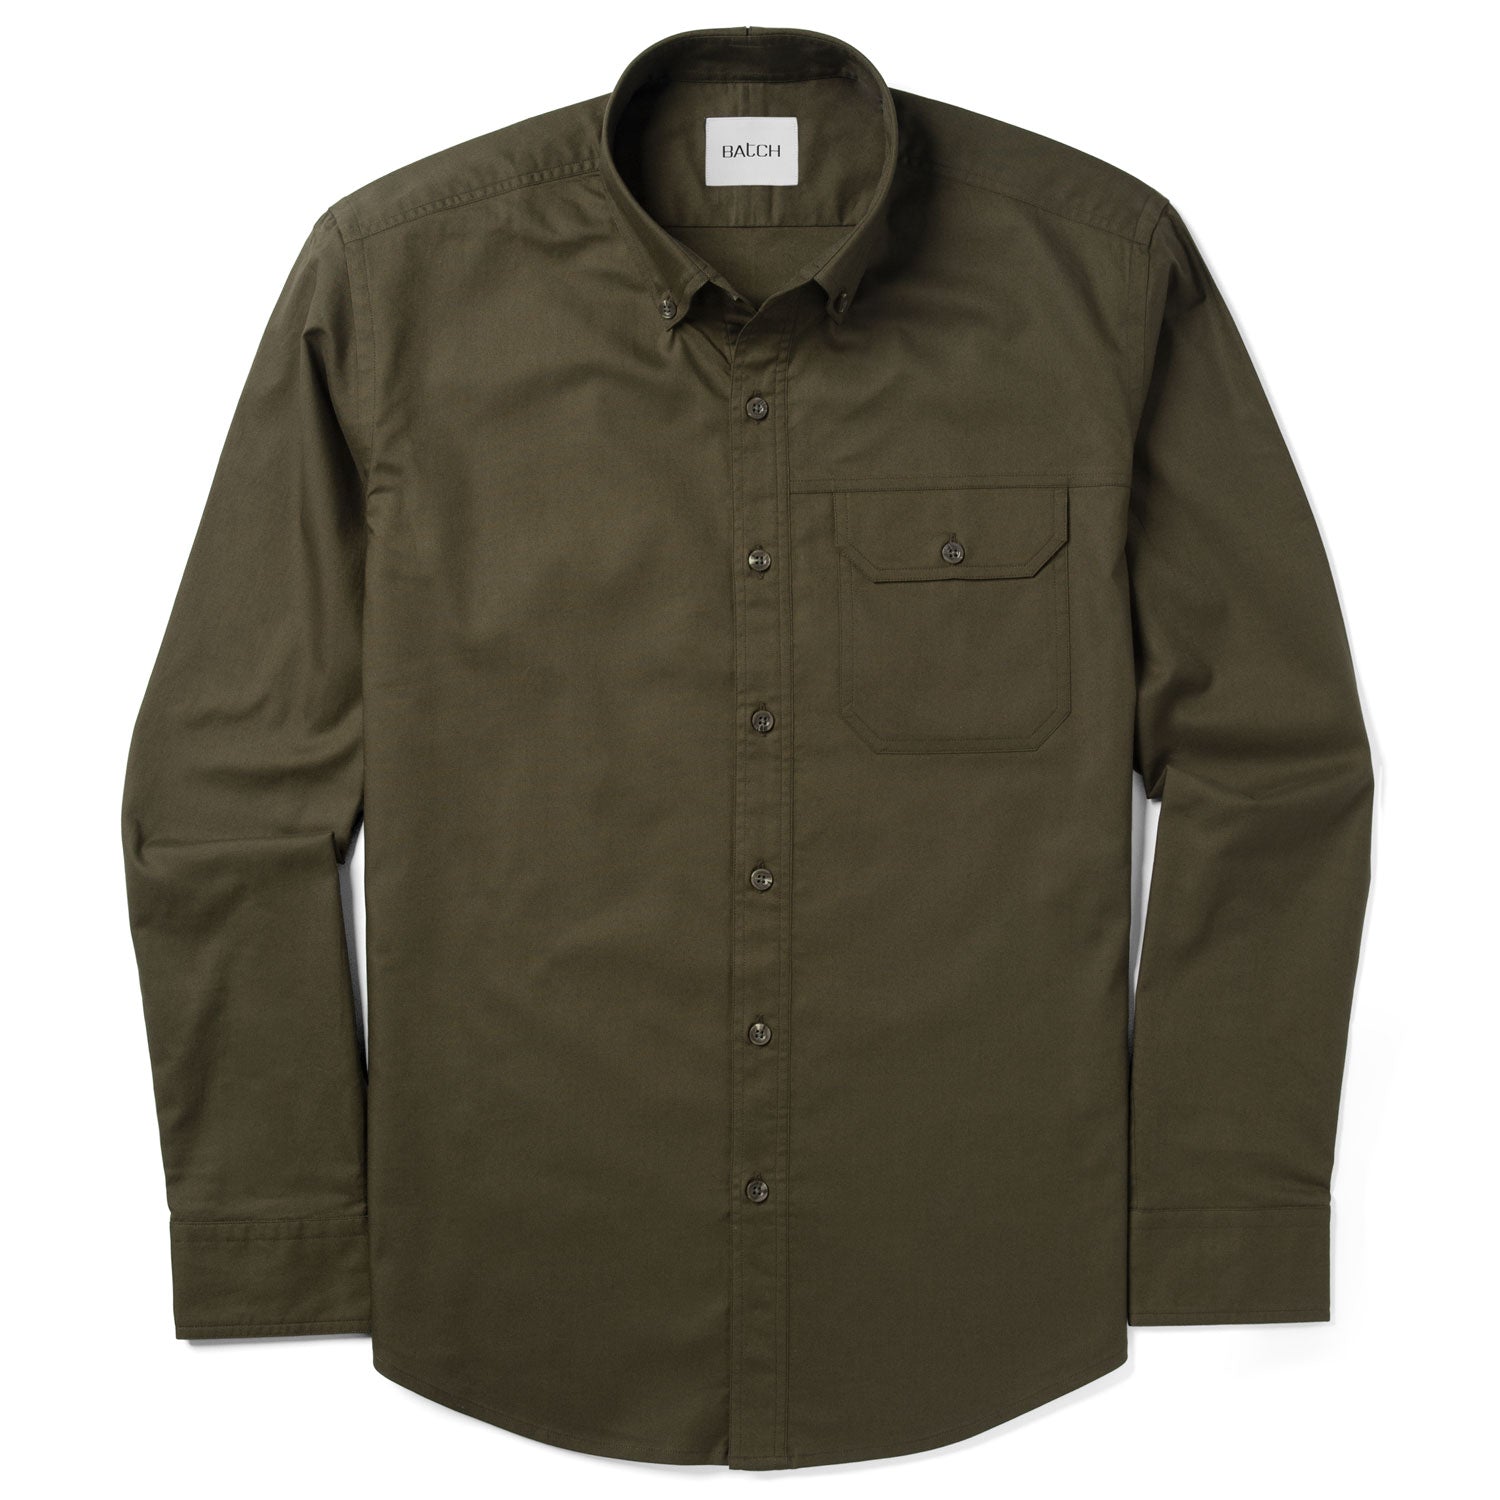 Builder Casual Shirt – Olive Green Cotton Oxford